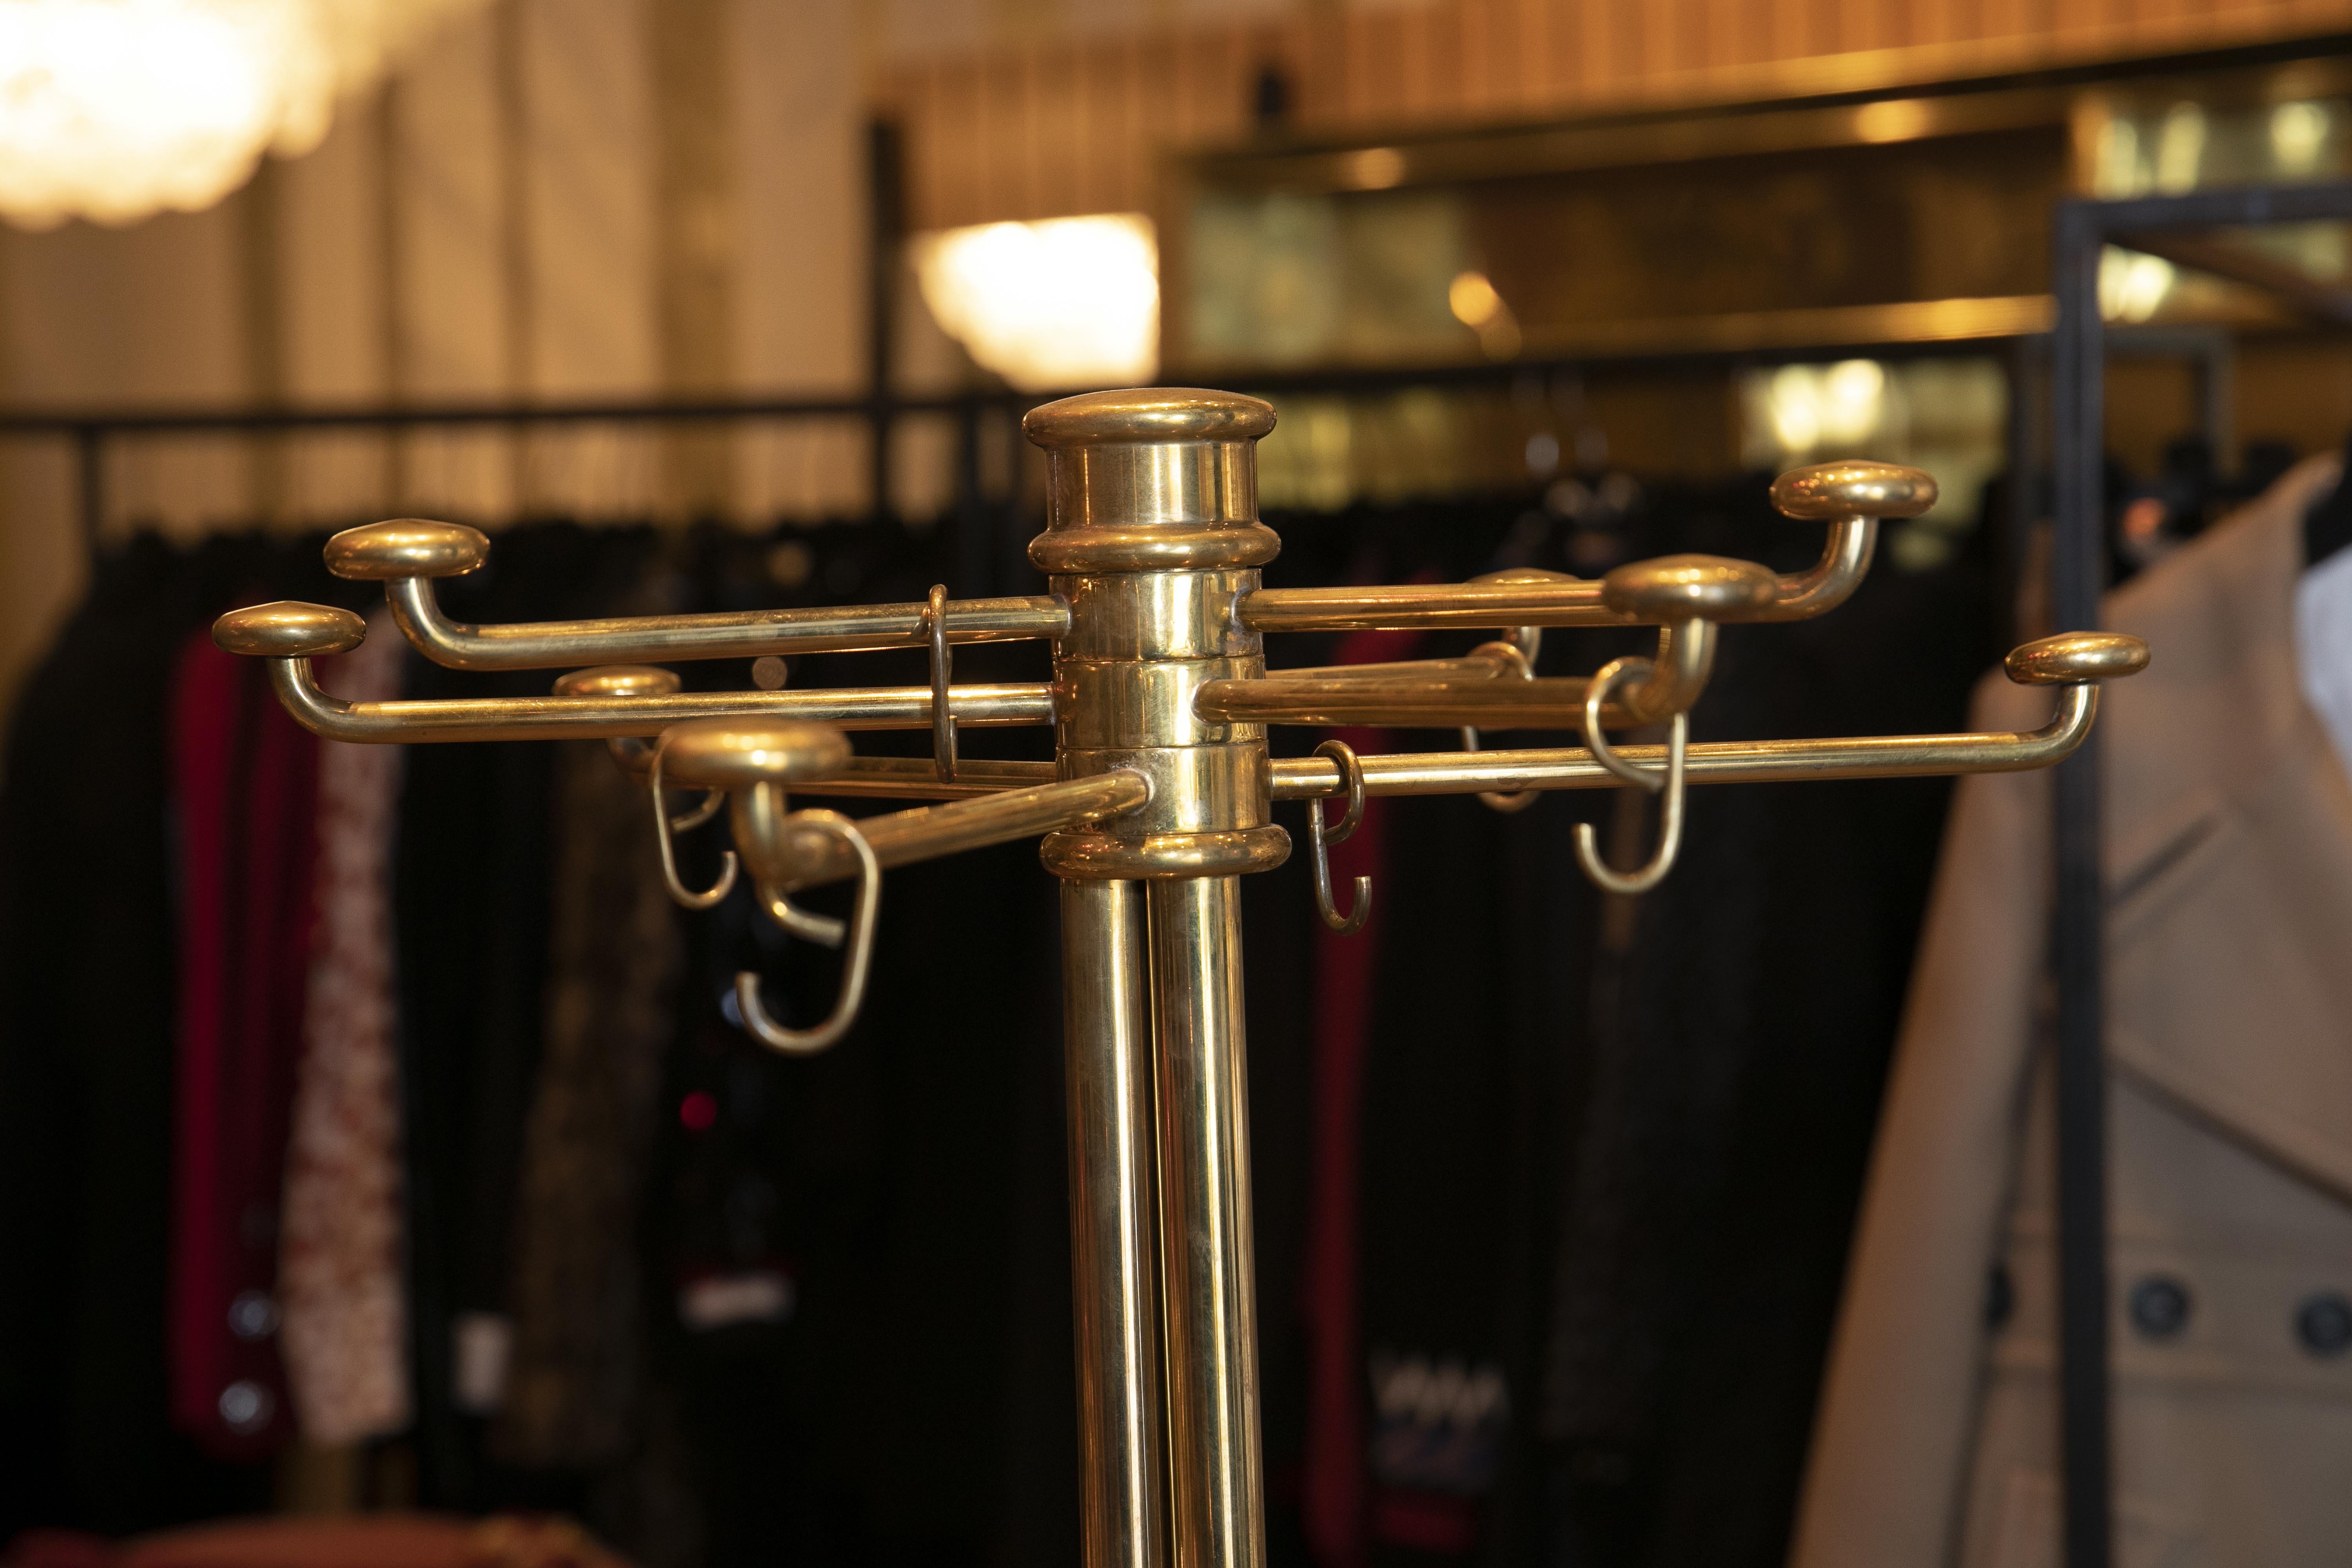 Clothes hanger from the 1980s made of brass with black marble base.
Arms for hanging coats are movable
Made in Italy.